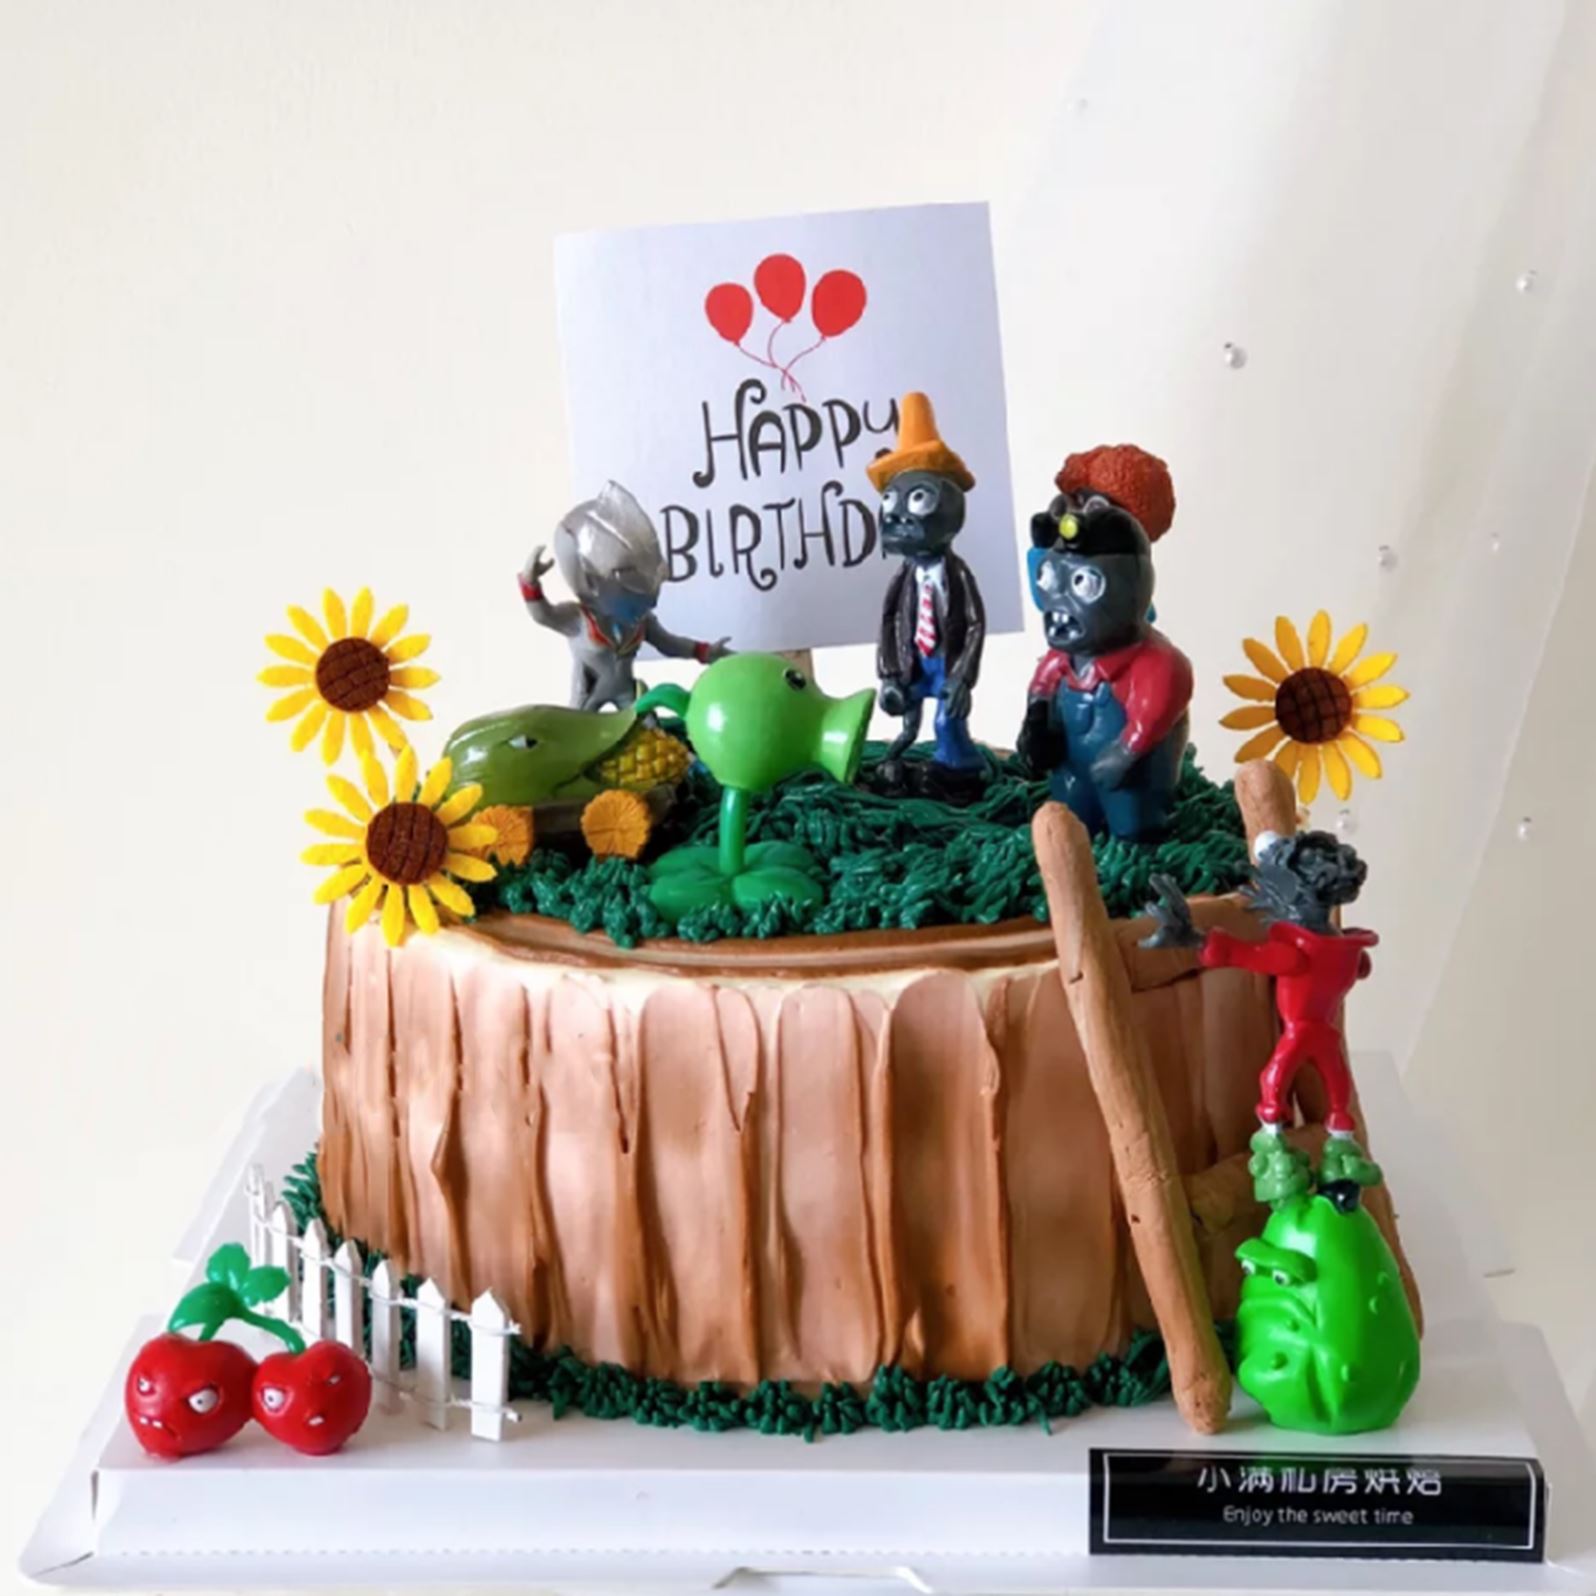 Discover 140+ plants vs zombies cake